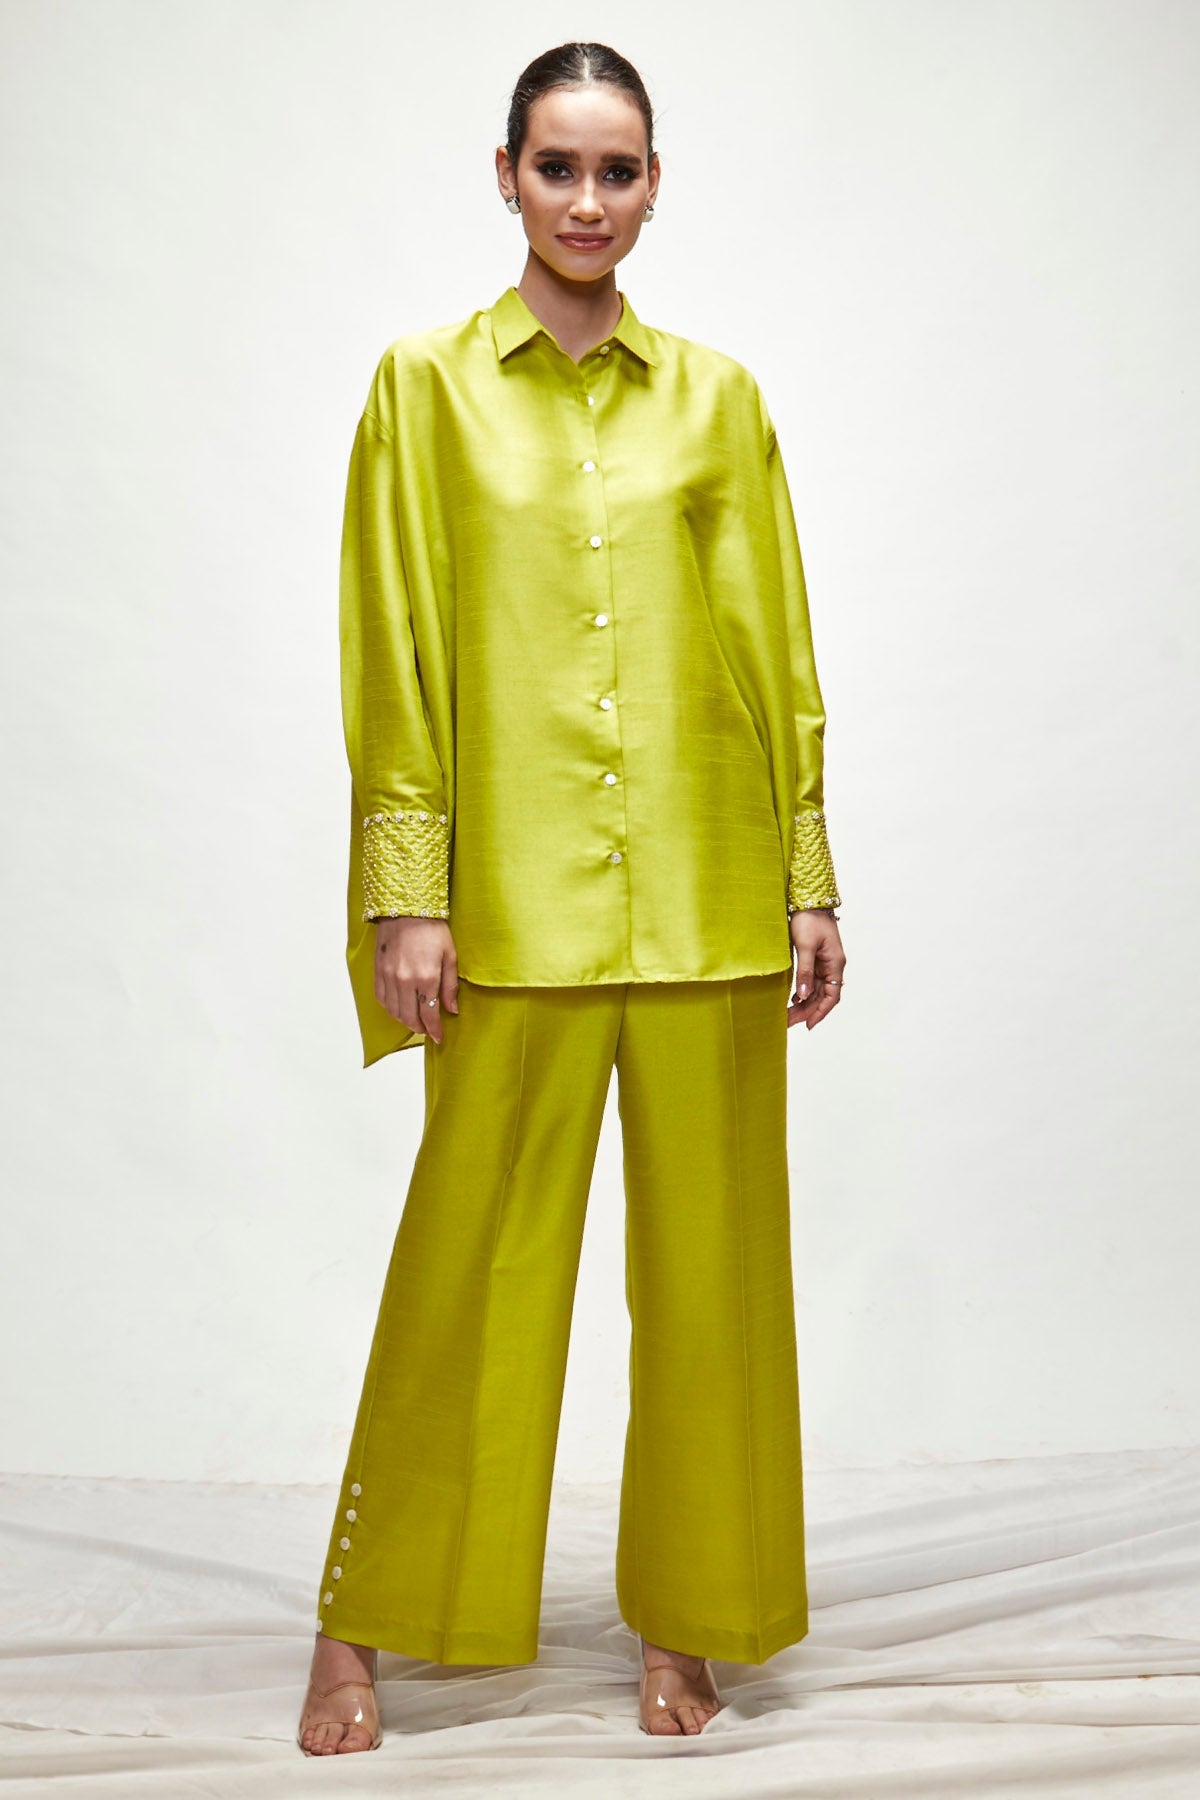 Designer Ranian Lime green silk blend relaxed co-ord set with straight pants and shirt with broad cuffs and pearls For Women Online at ScrollnShops